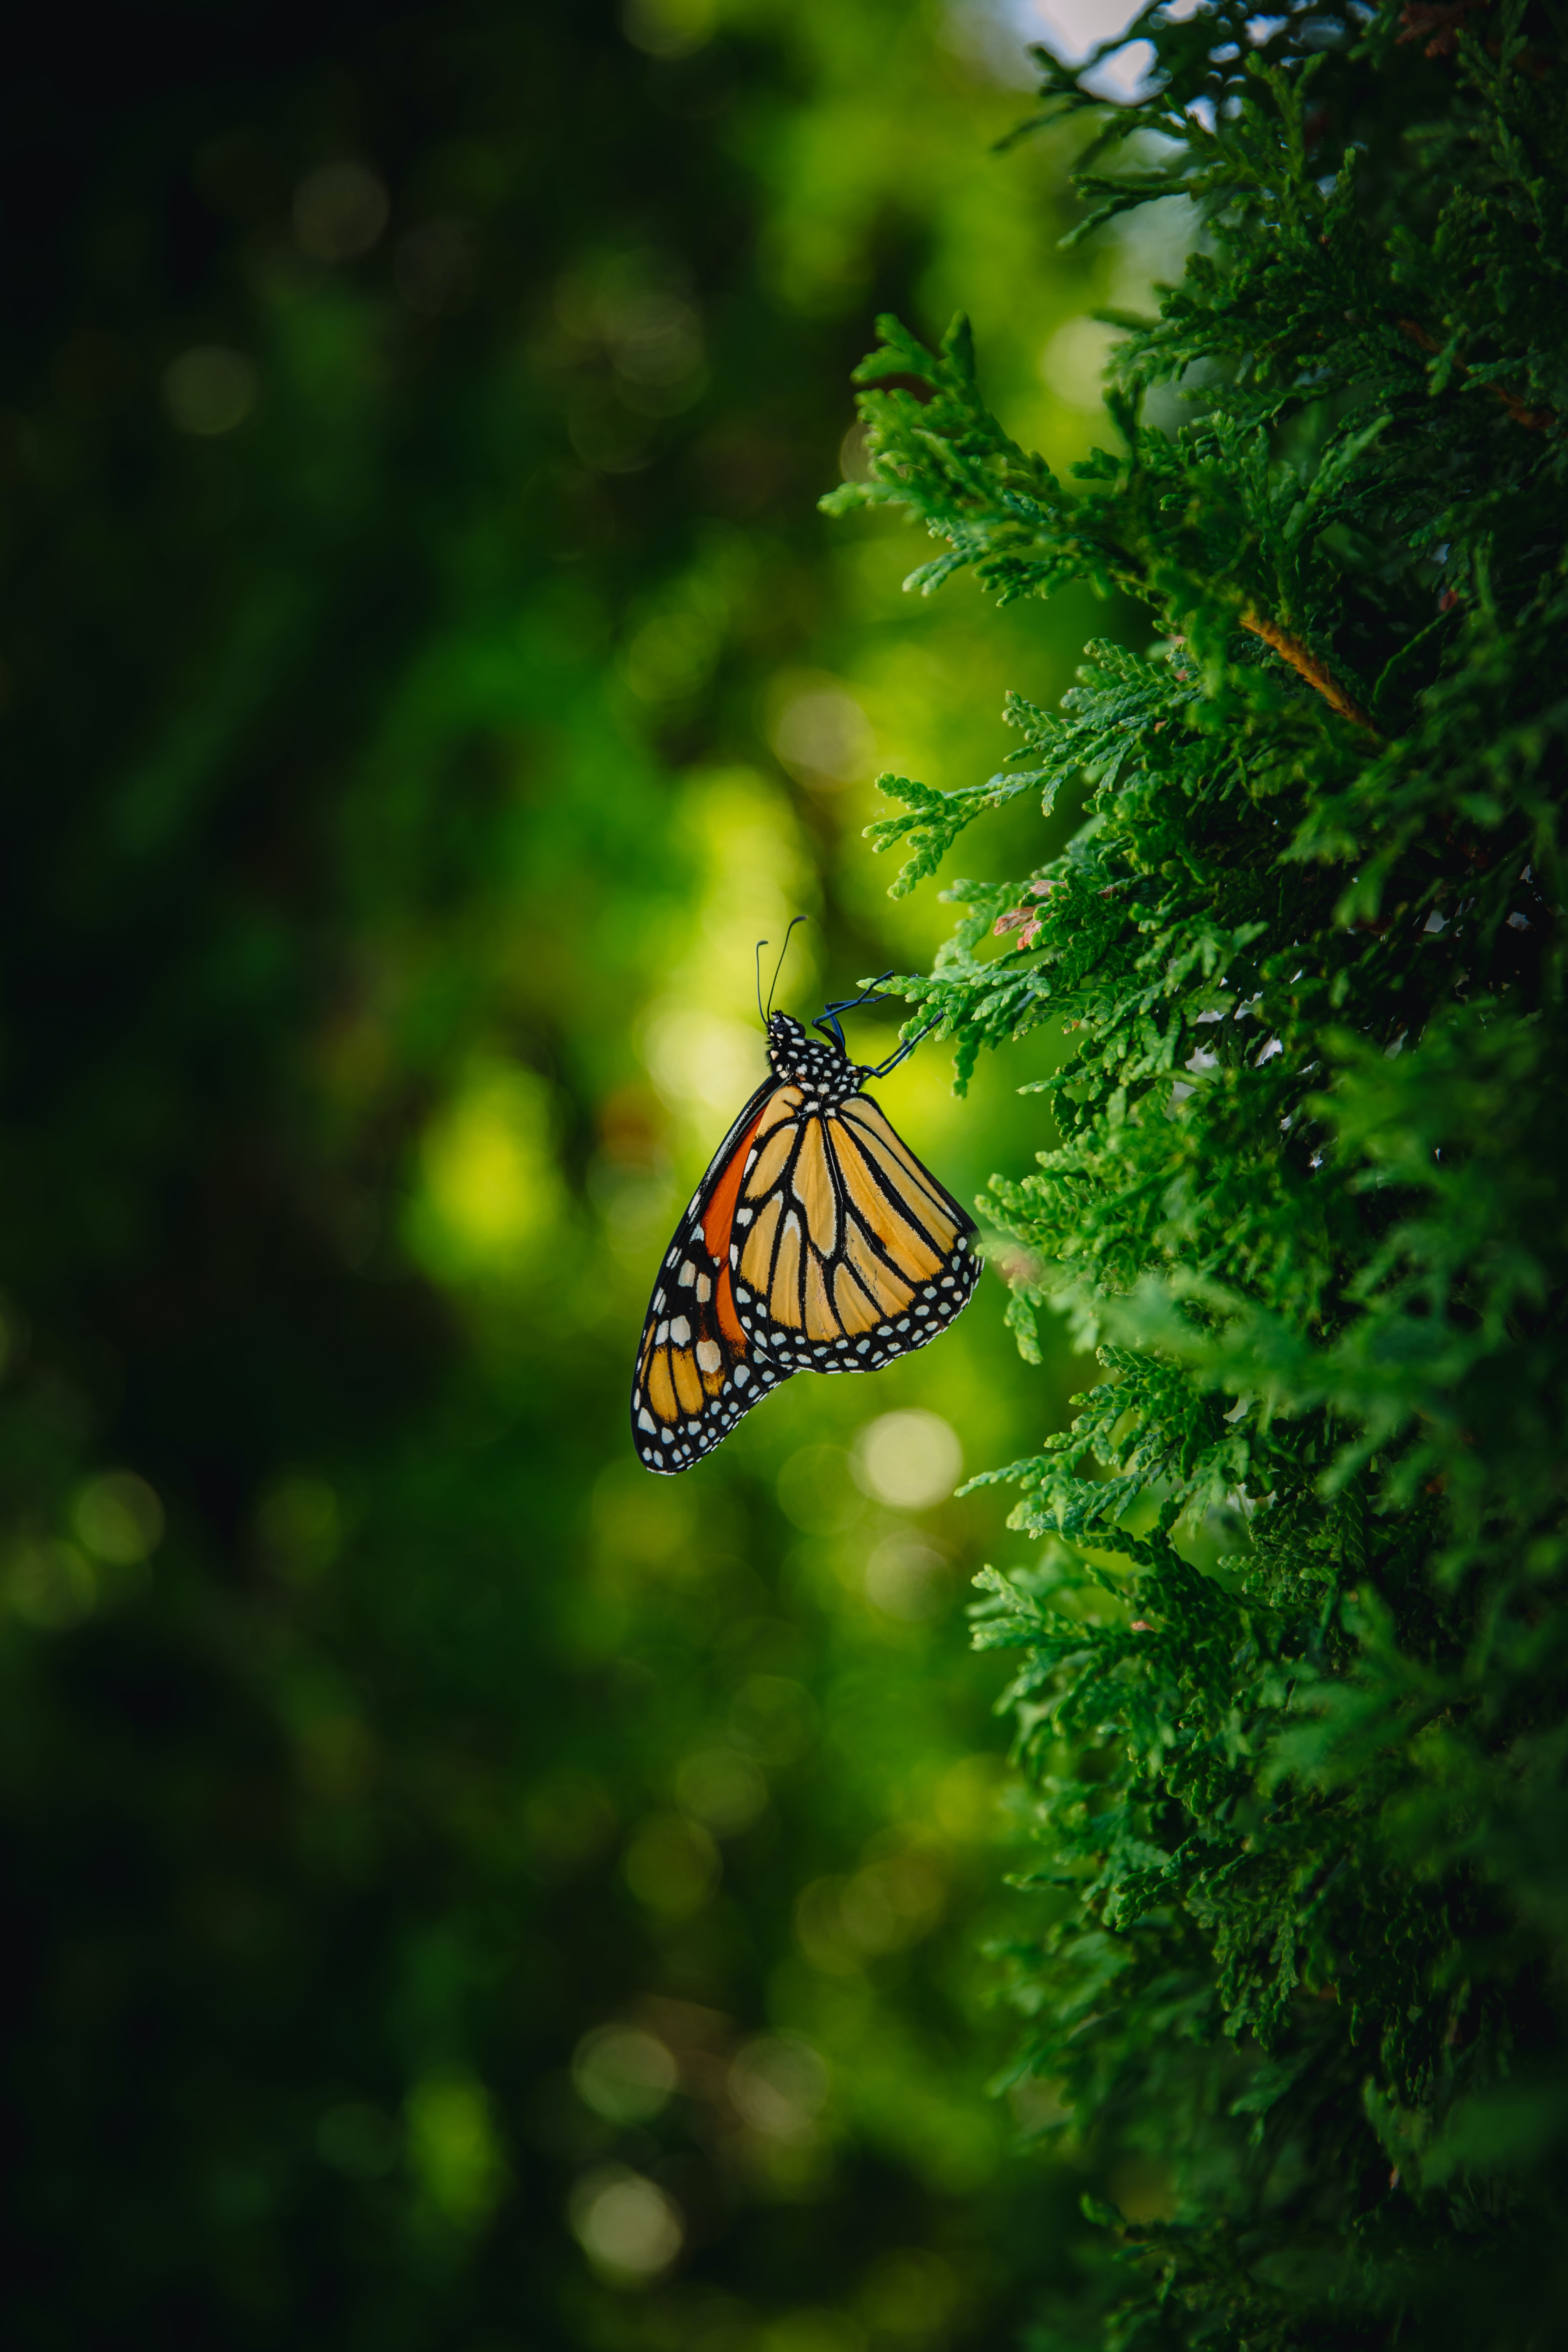 72748 download wallpaper insect, macro, branch, butterfly, monarch butterfly, butterfly monarch screensavers and pictures for free